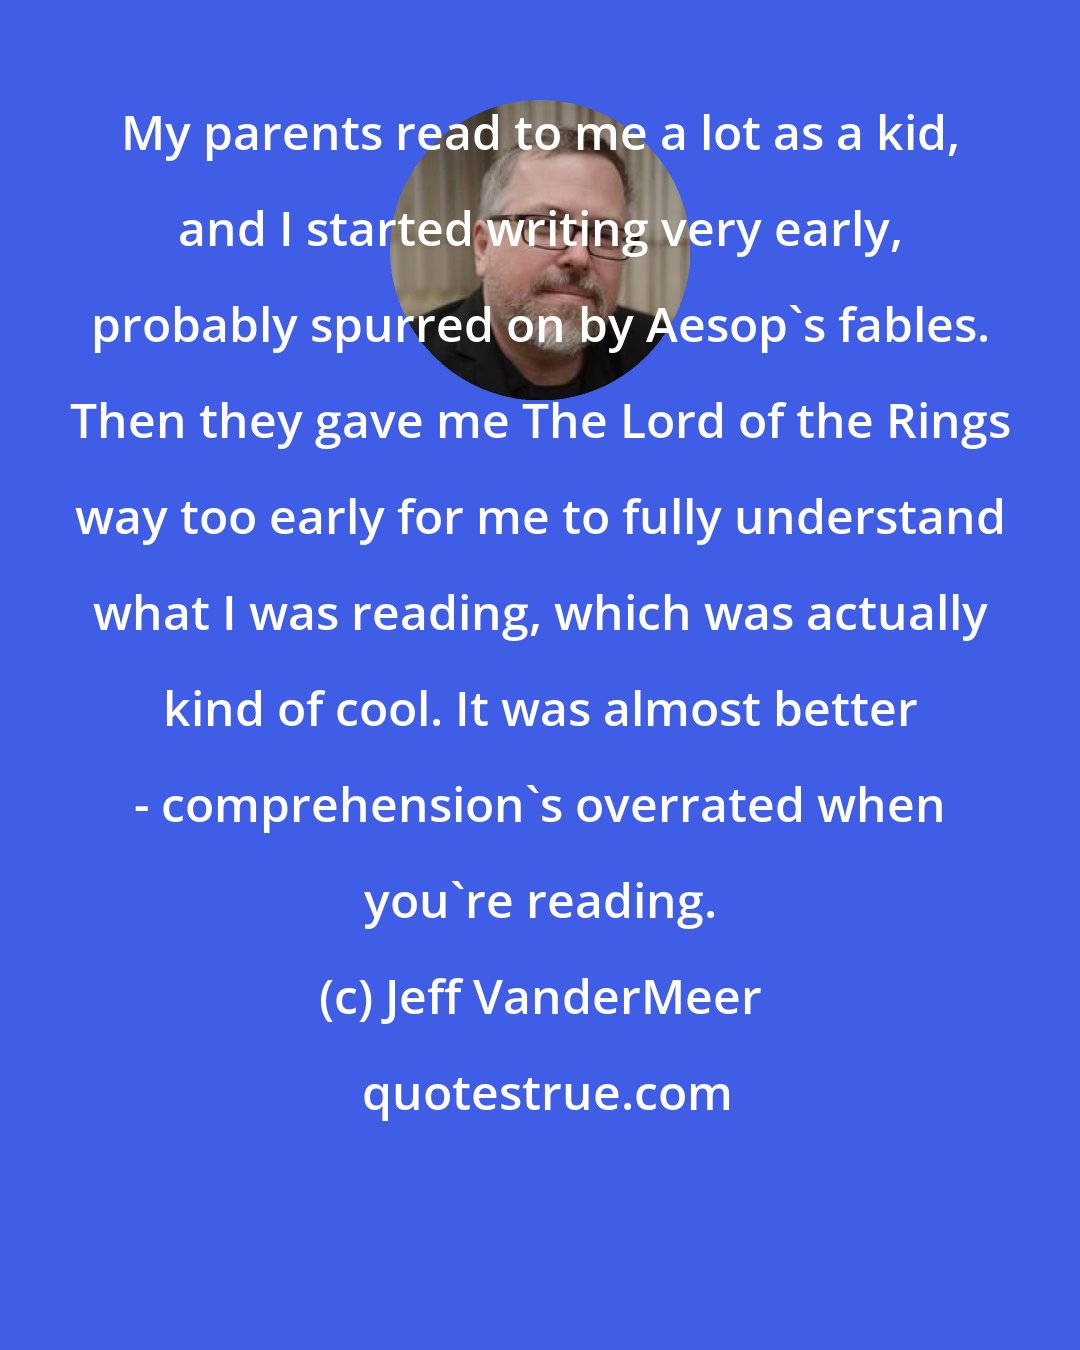 Jeff VanderMeer: My parents read to me a lot as a kid, and I started writing very early, probably spurred on by Aesop's fables. Then they gave me The Lord of the Rings way too early for me to fully understand what I was reading, which was actually kind of cool. It was almost better - comprehension's overrated when you're reading.